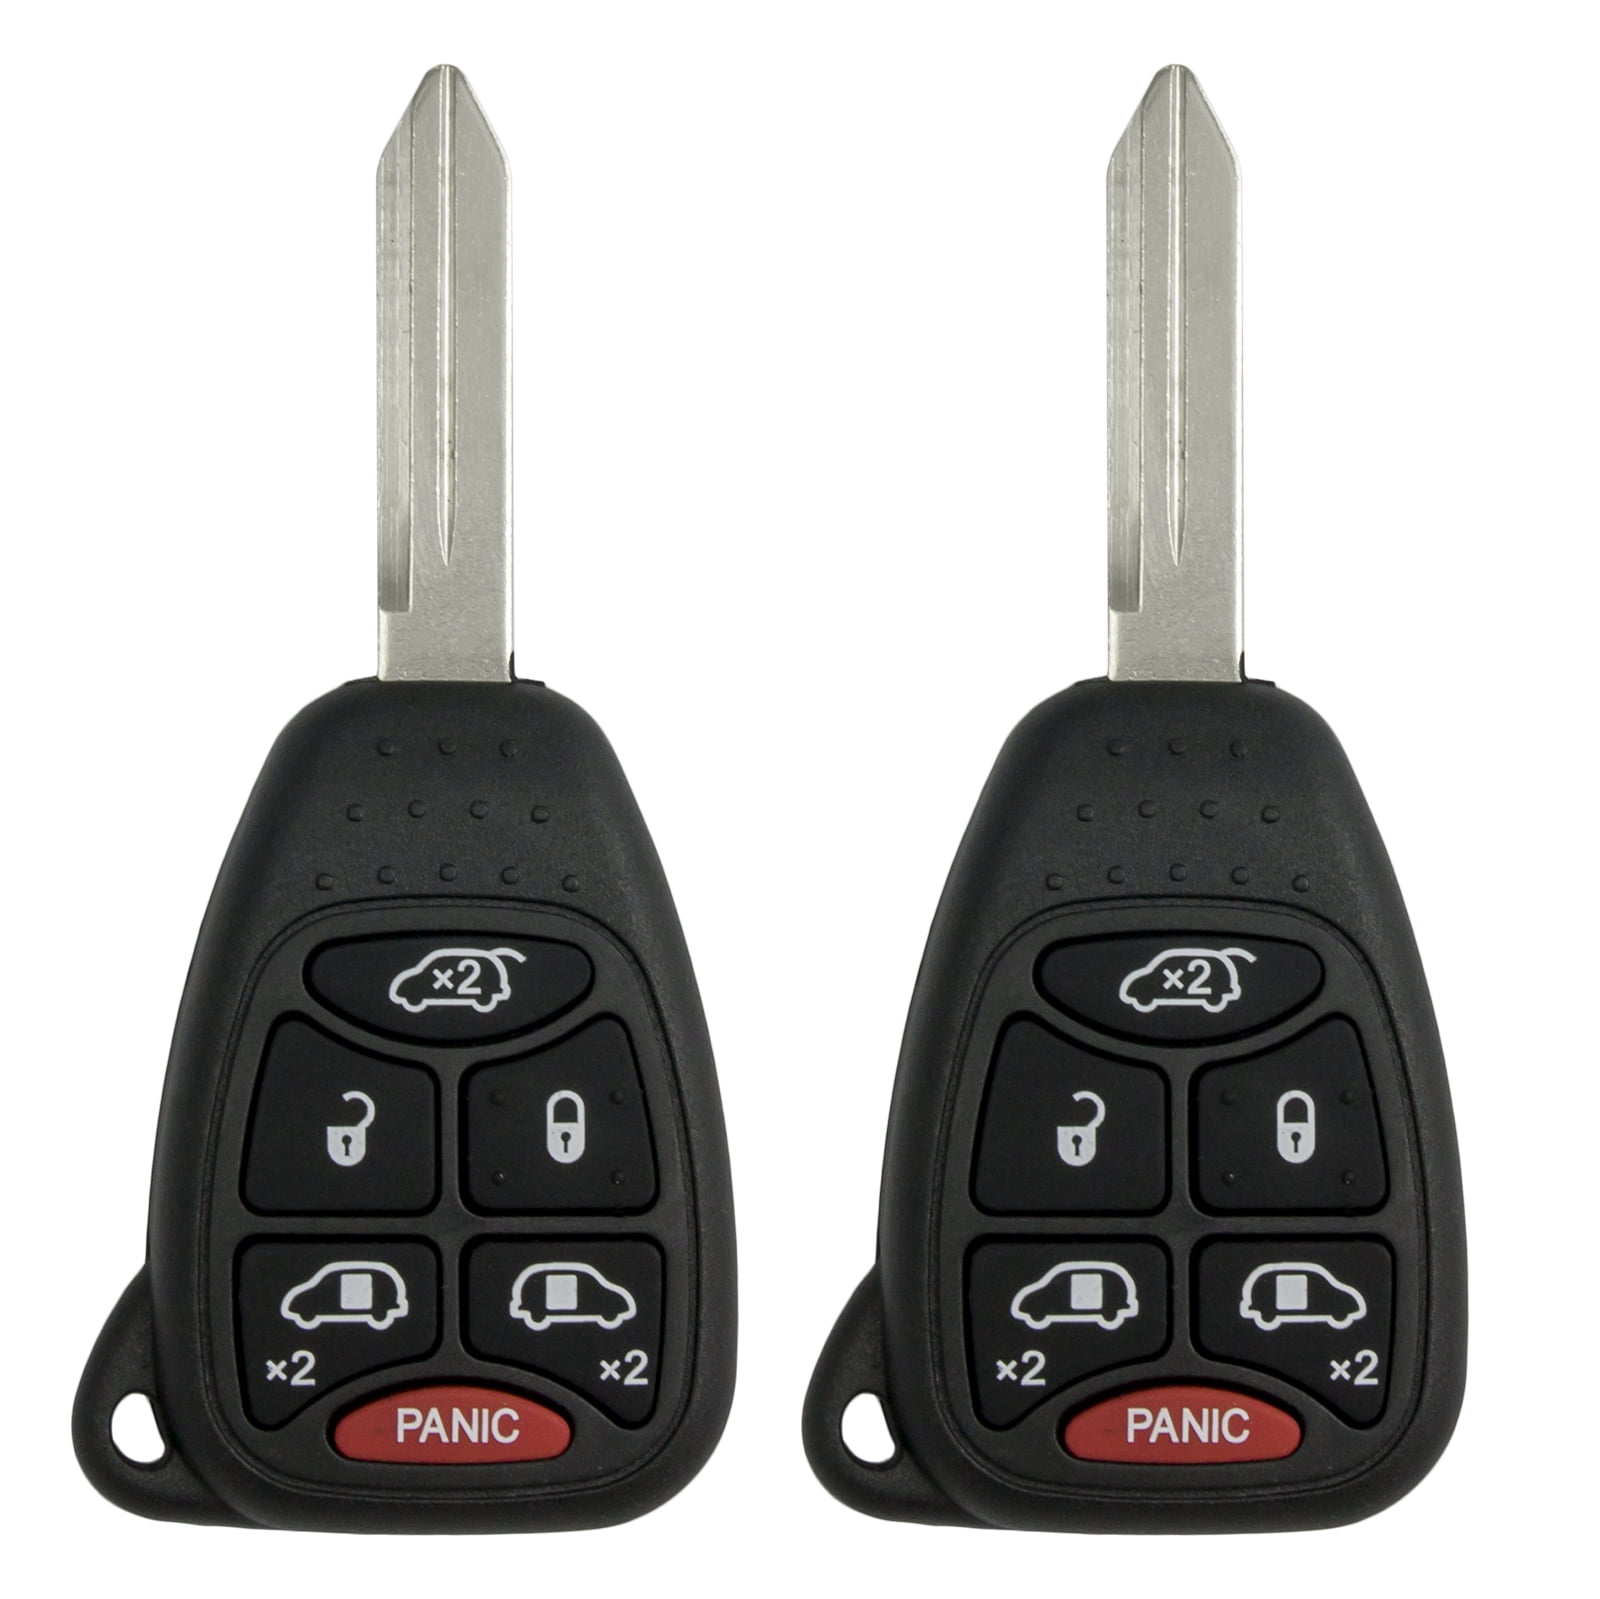 CanadaAutomotiveSupply /© 2 New Replacement Uncut Keyless Fobik Key Fobs for Select Chrysler Dodge With FREE DIY Programming Guide